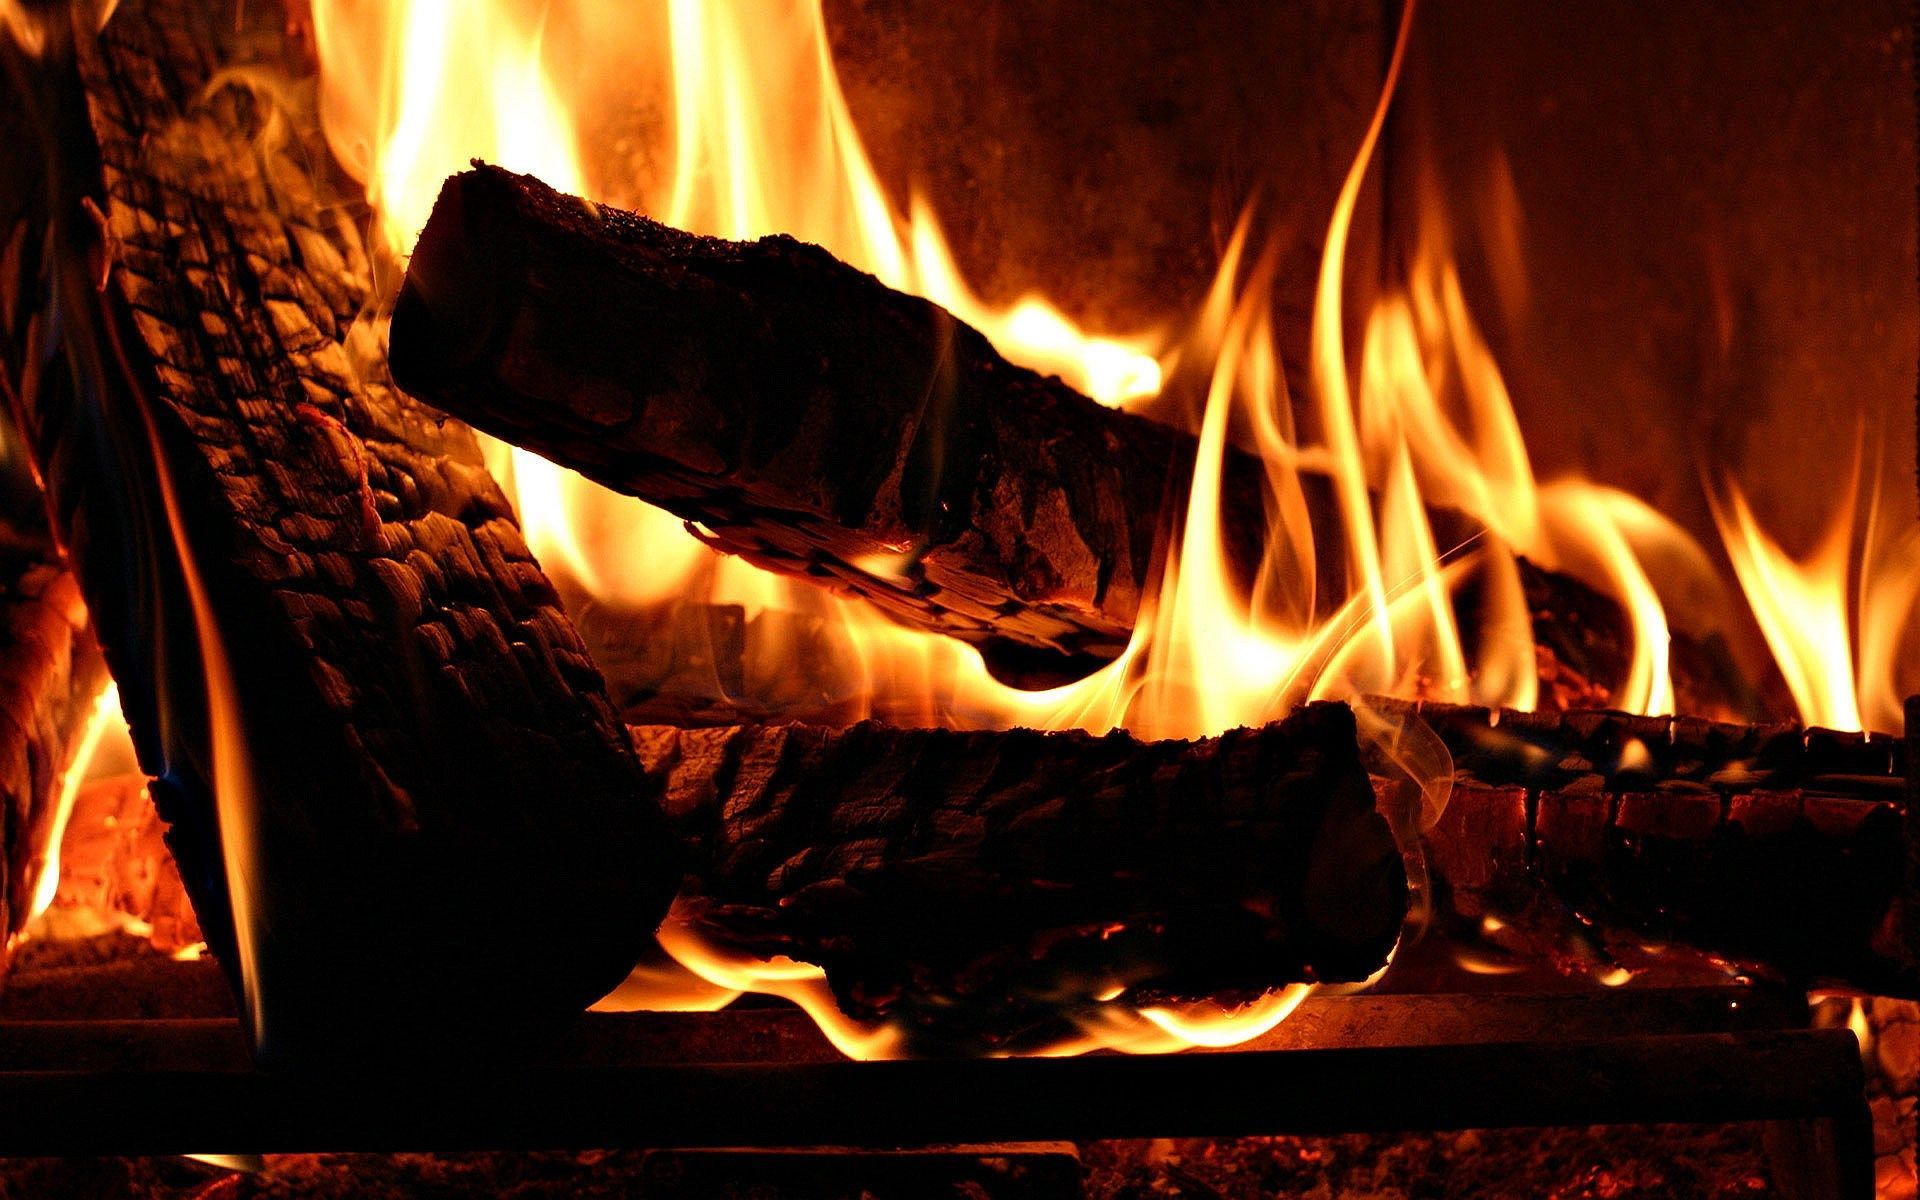 fire free computer wallpaper download. Fireplace, Fireplace picture, Wood burning stove